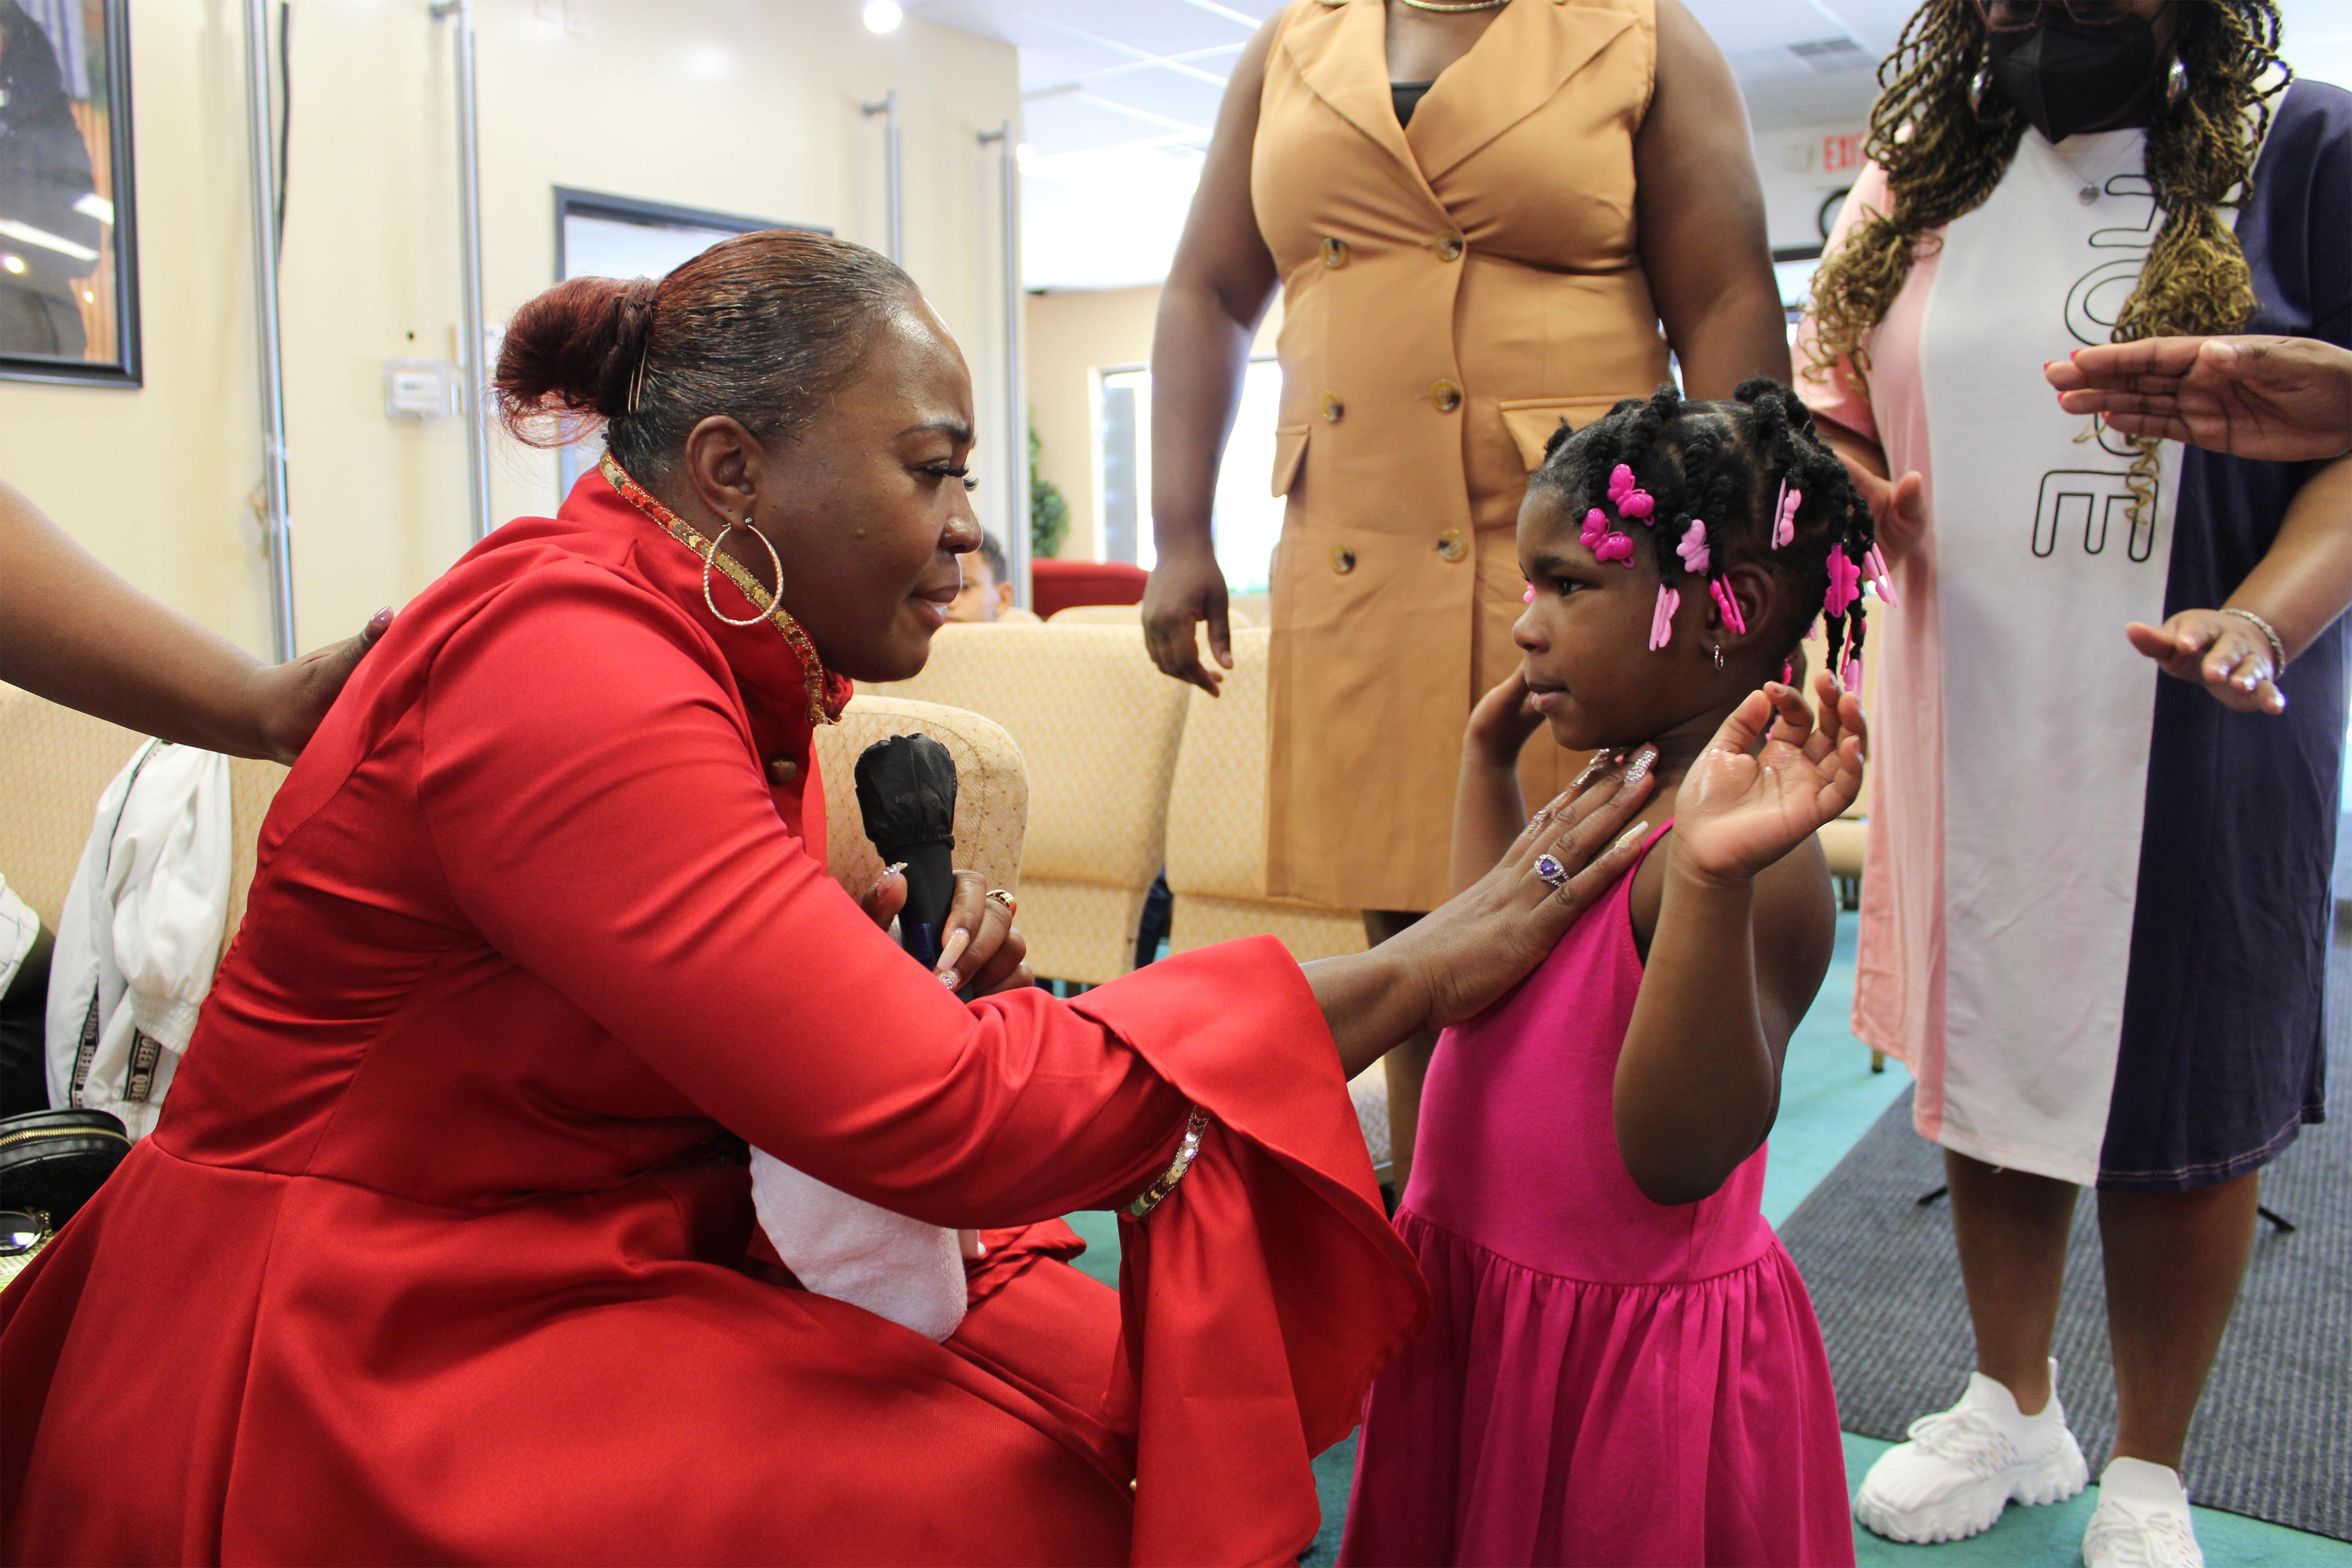 A photo shows April Roby-Bell inside her church, placing a hand on a young girl's heart.